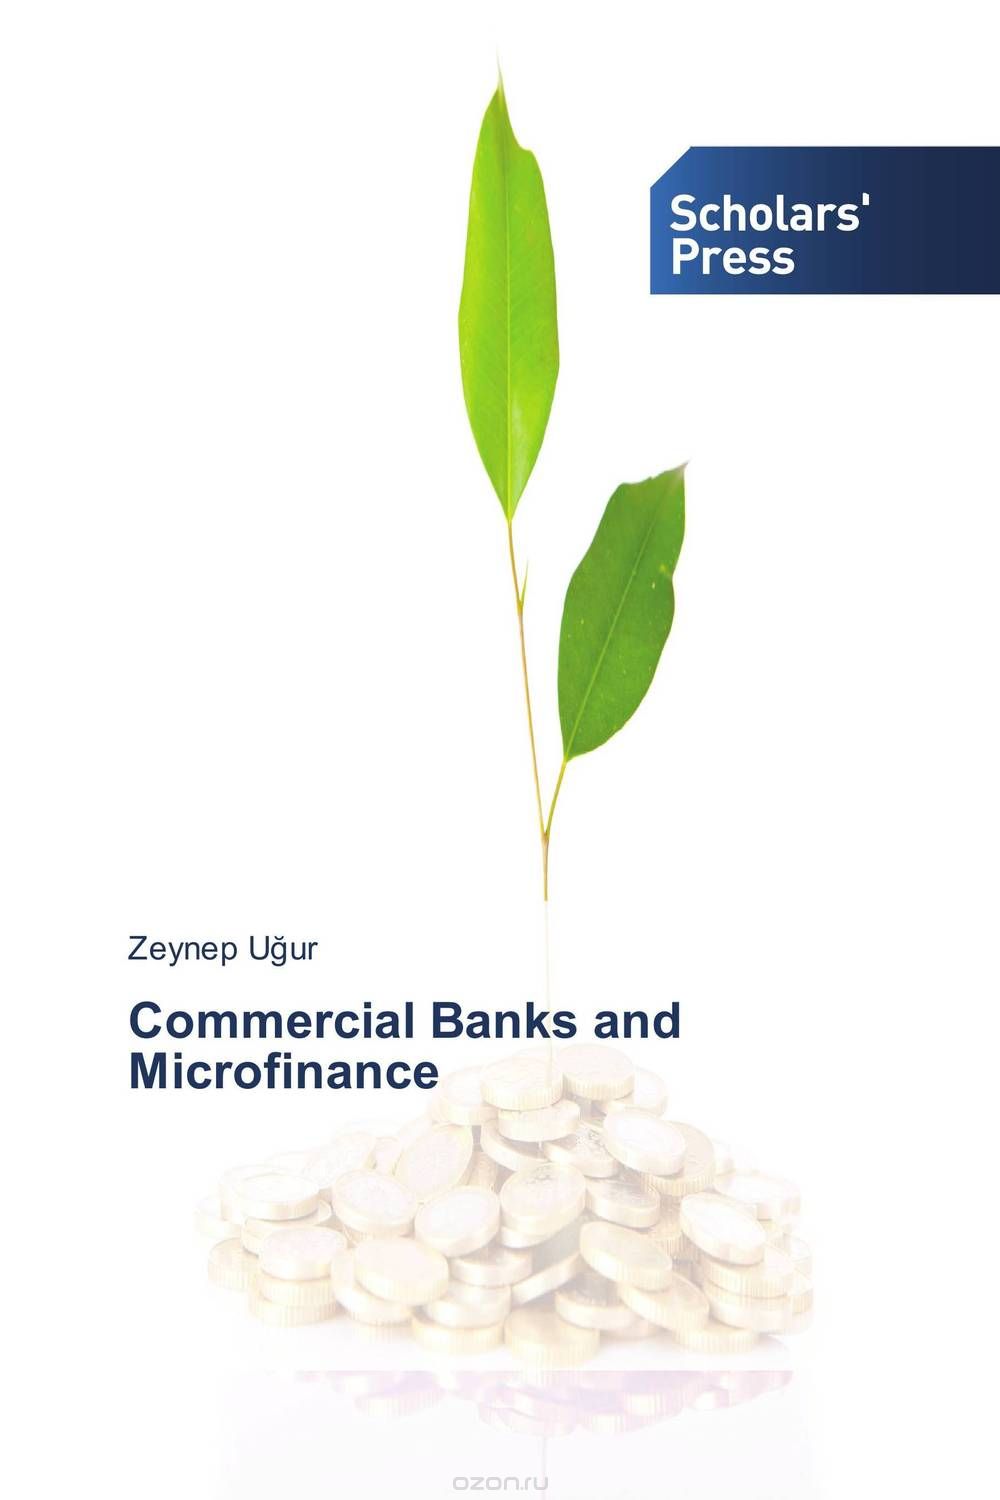 Commercial Banks and Microfinance